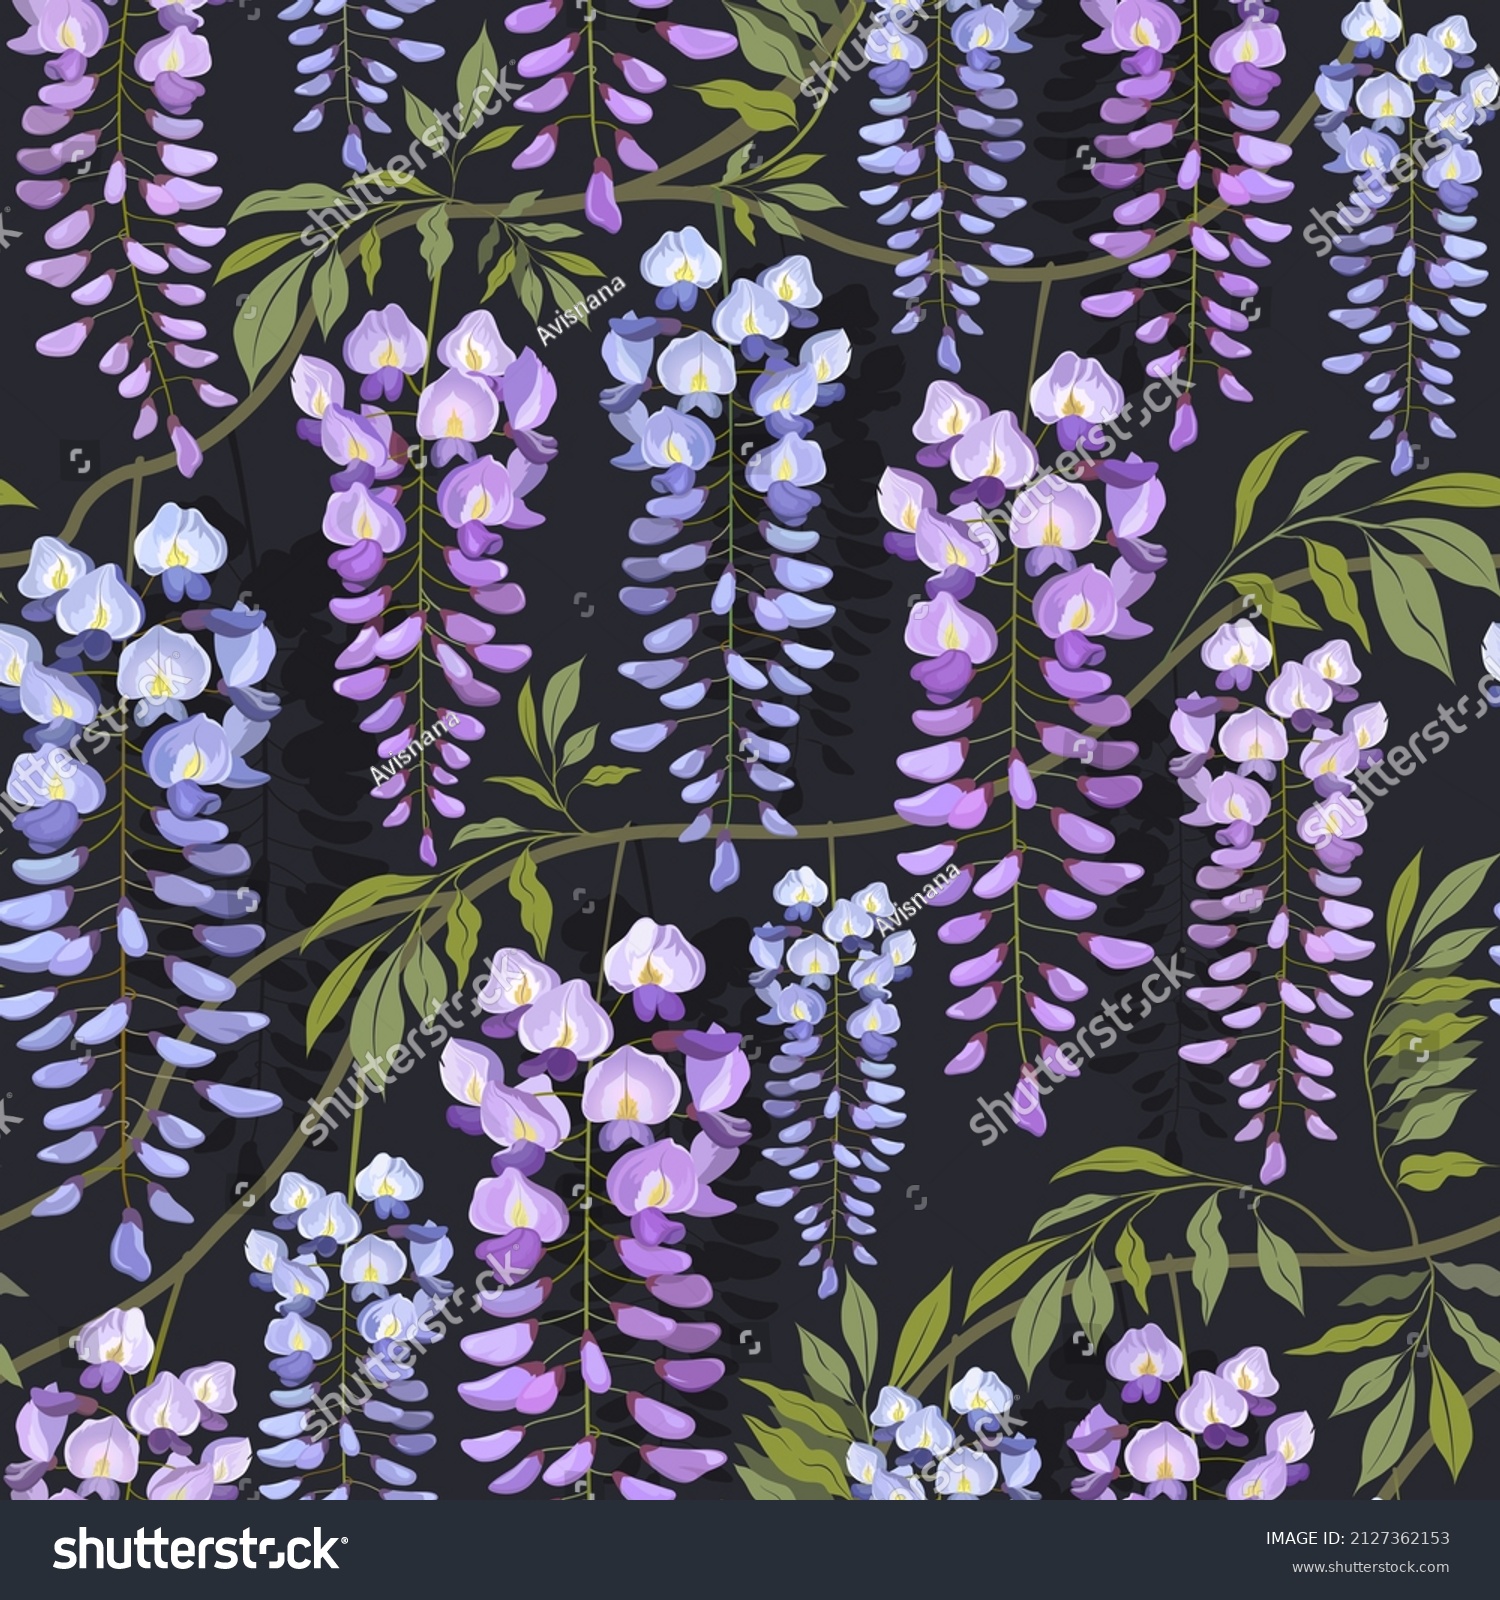 SVG of Seamless floral pattern with blooming blue-purple wisteria plant svg